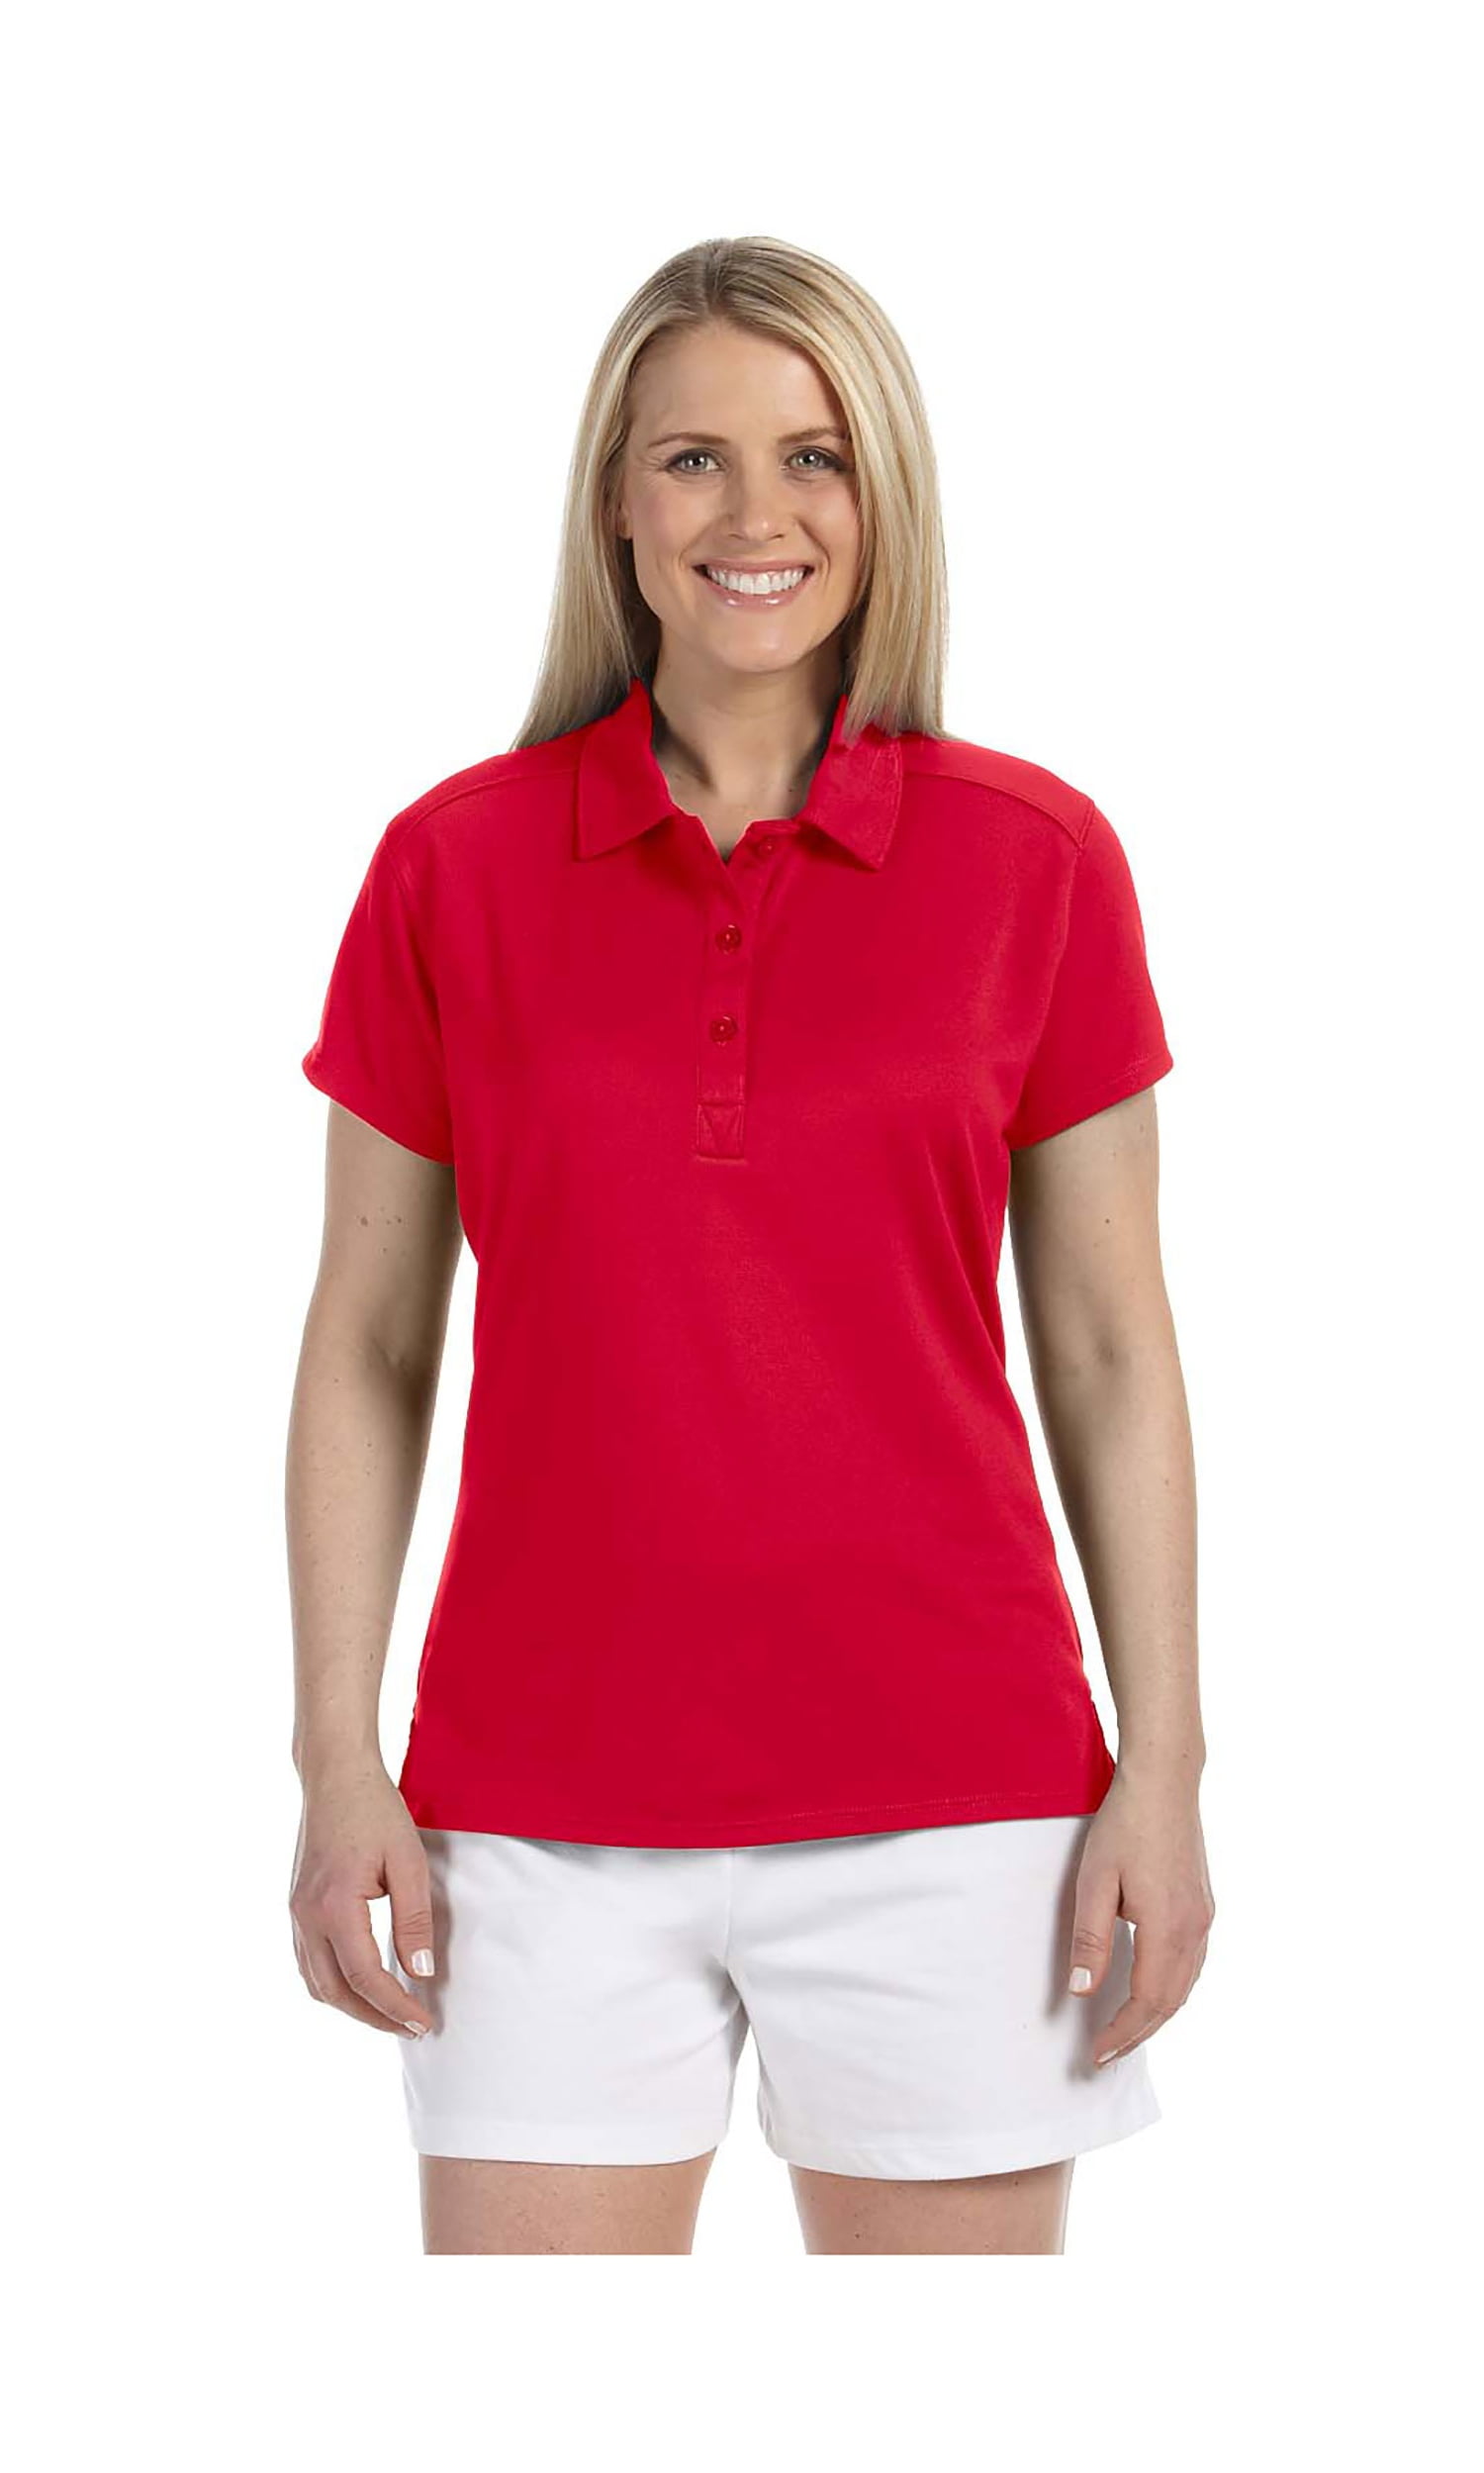 Russell Athletic - Russell Athletic Women's Team Essential Polo Shirt ...